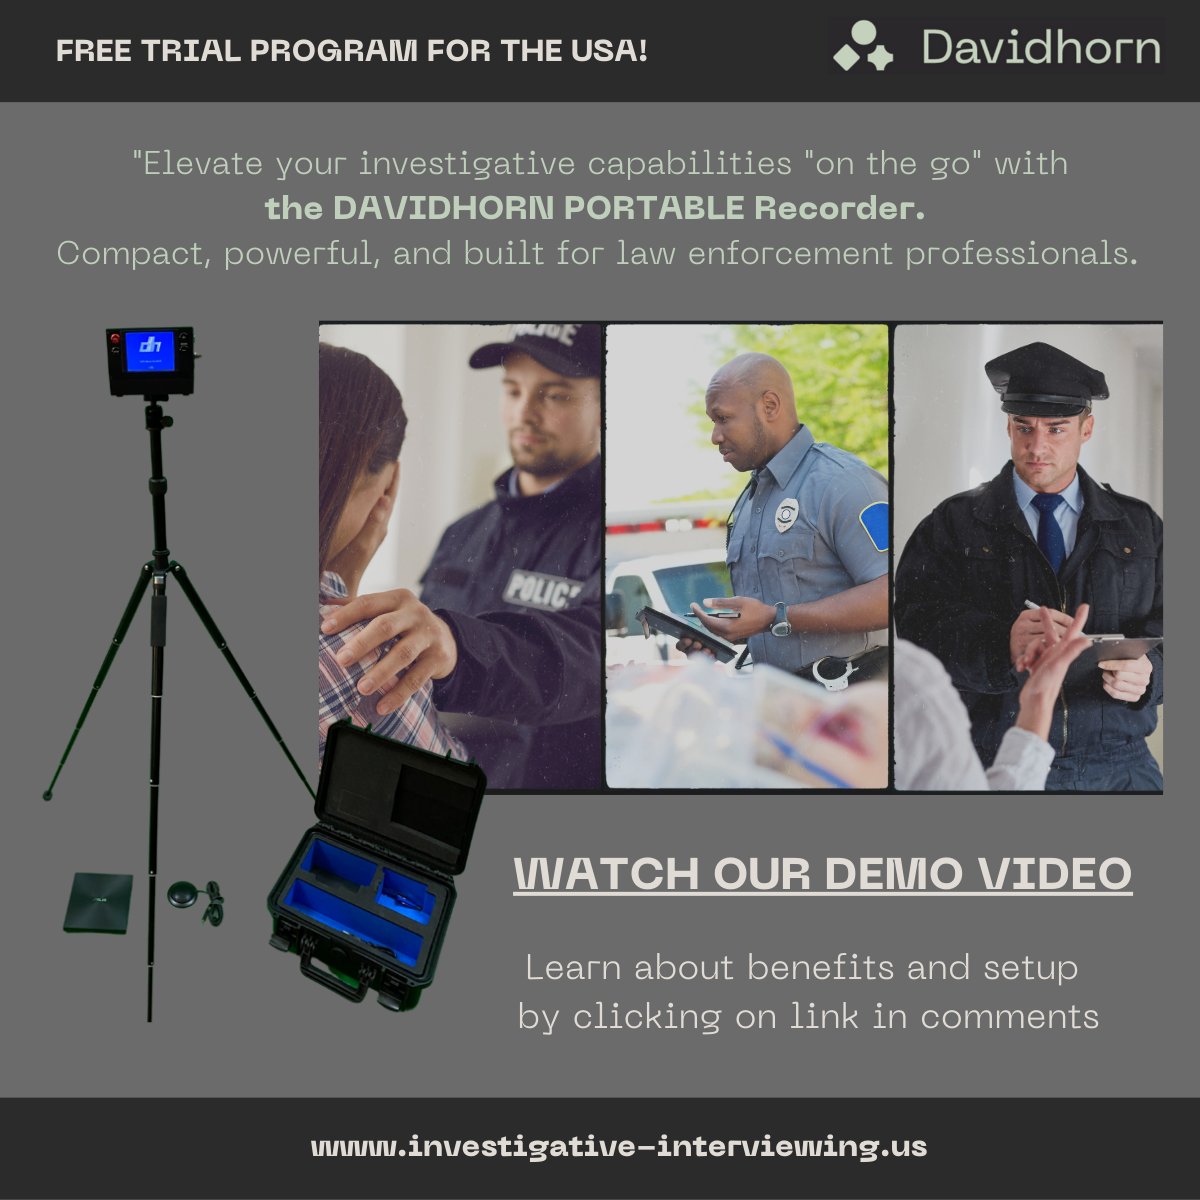 FREE TRIAL! TRY OUT THE DAVIDHORN PORTABLE RECORDER.
Experience firsthand the benefits of having a secure and efficient way to record interviews in the field.
#investigativeinterviewing #evidence #policing #interviewrecording  #police #sheriff #lawenfocement #davidhorn